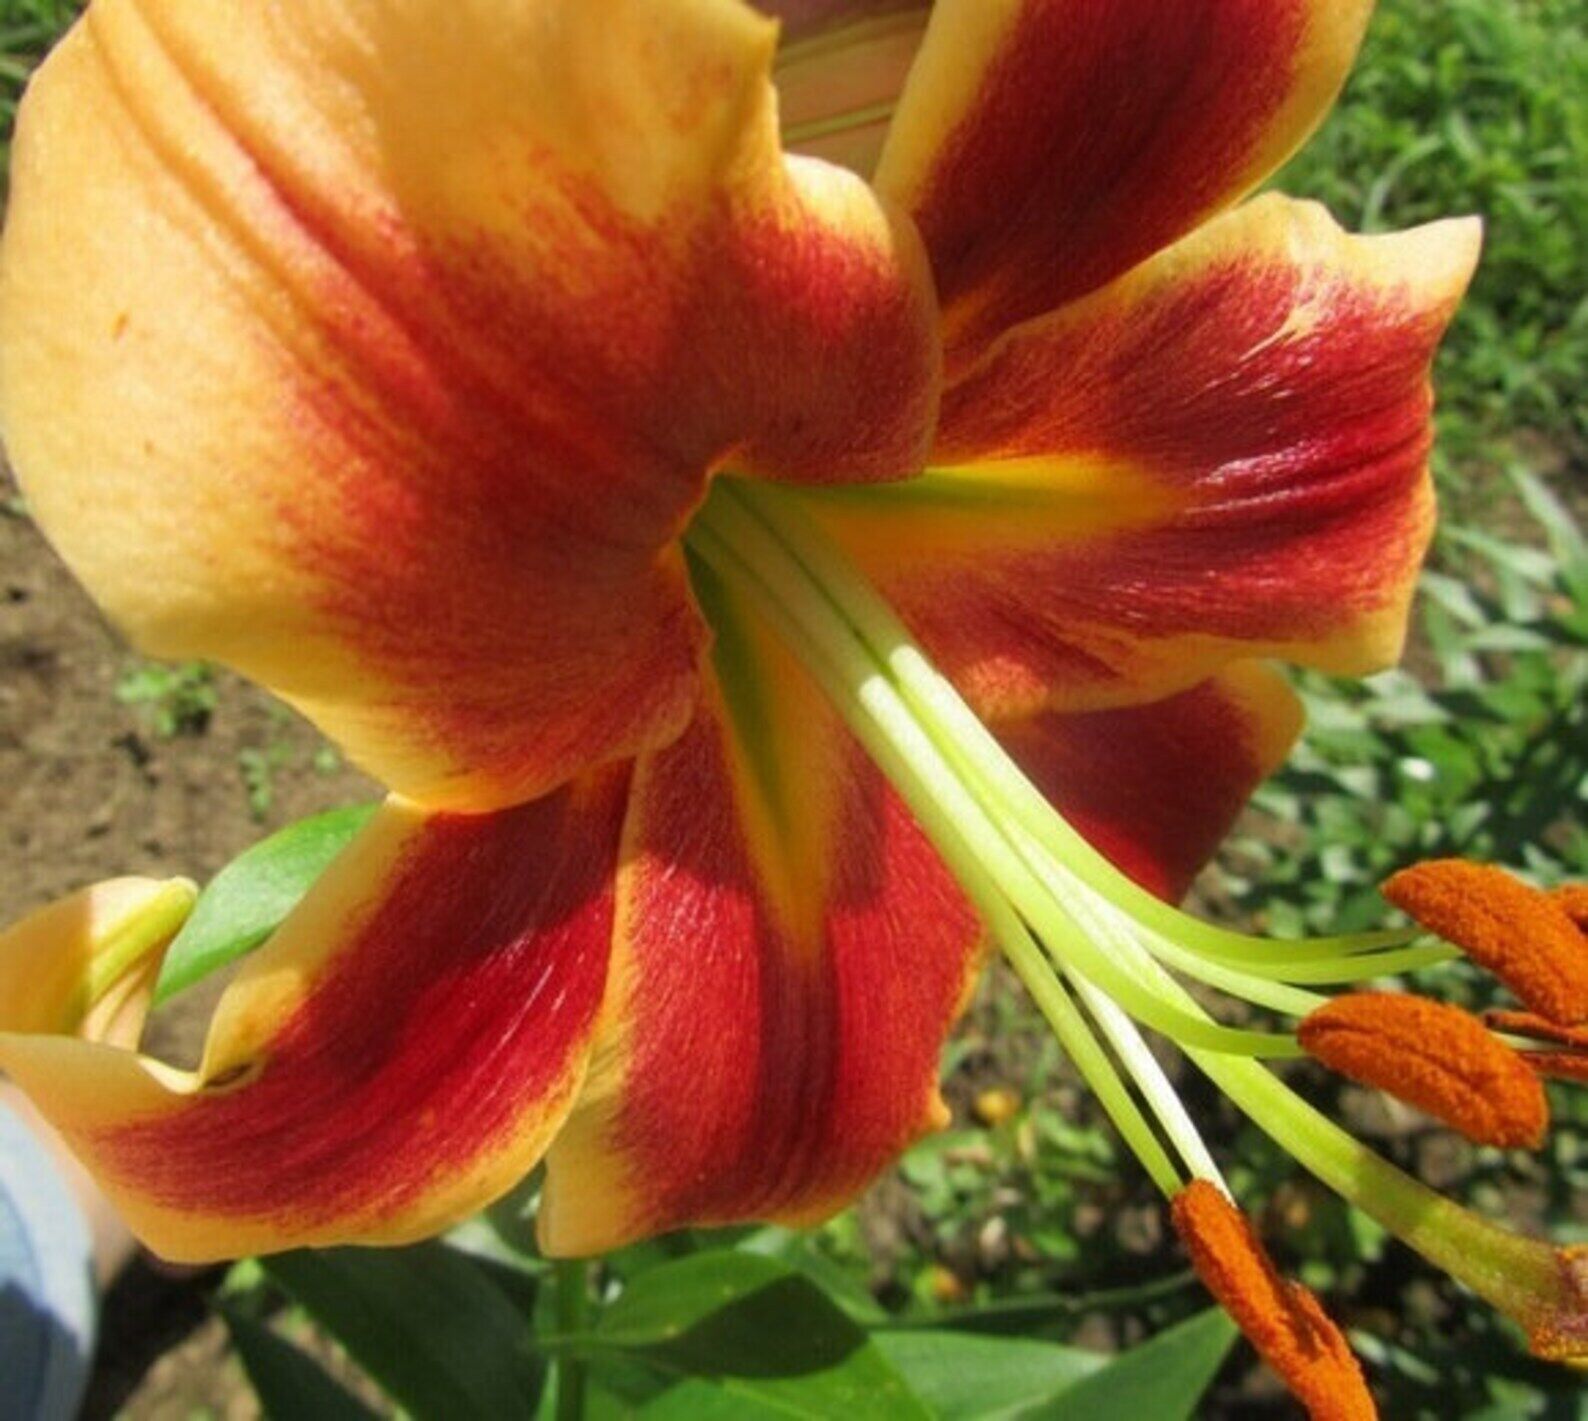 DEBBY TREE LILY FLOWER BULBS HARDY GROWS 4-6FT.TALL FRAGRANT 8" SUMMER BLOOMS!!